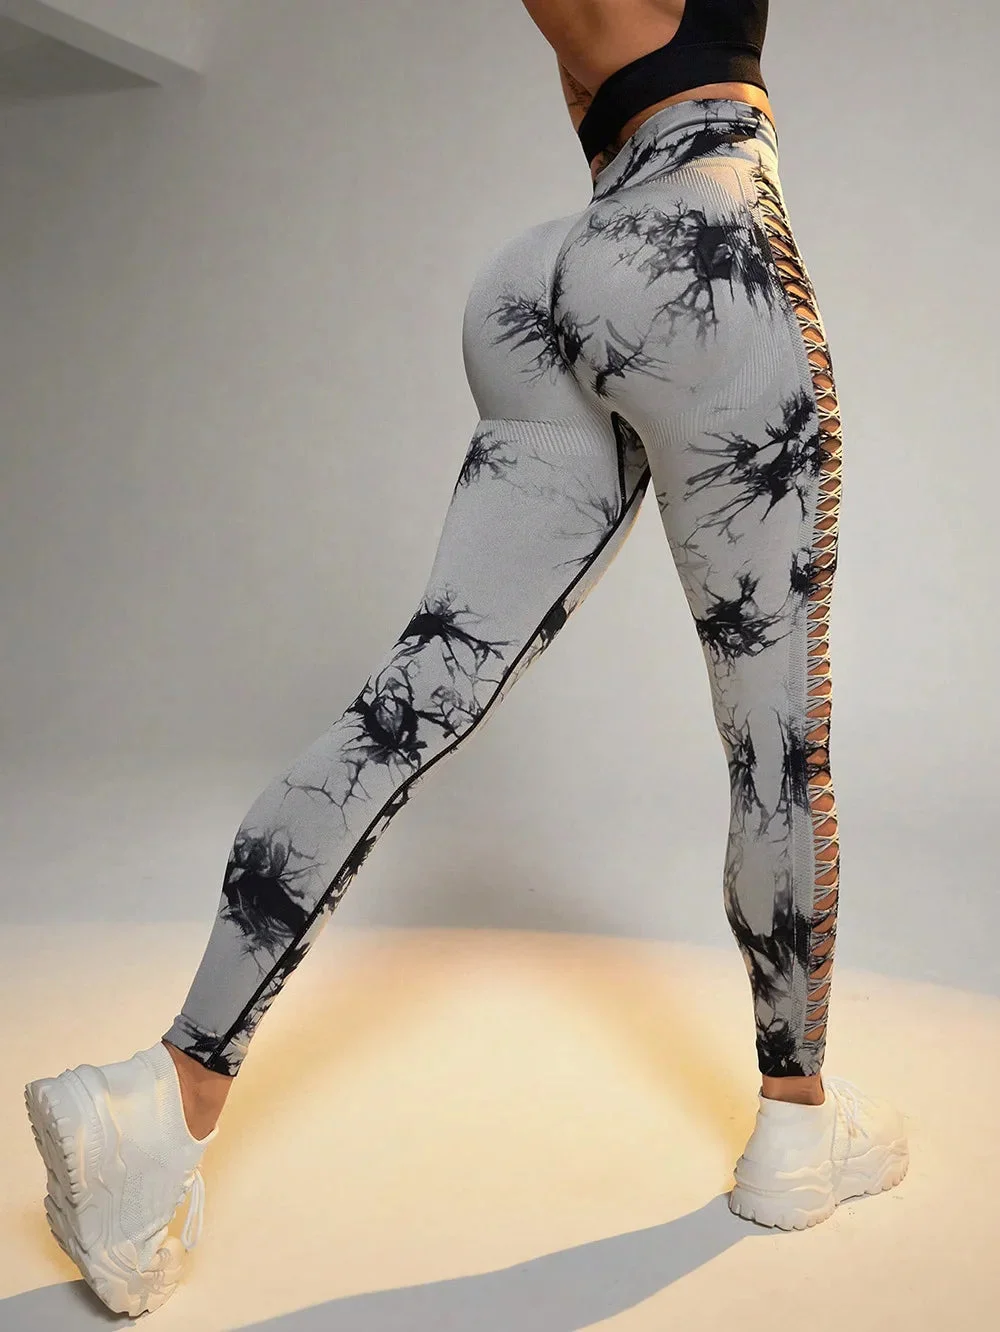 Tlbang Women Tie Dye Hollow Out Leggings Sports Yoga Pants Fitness Sportswear Sexy High Waist Push Up Gym Tights Running Leggings